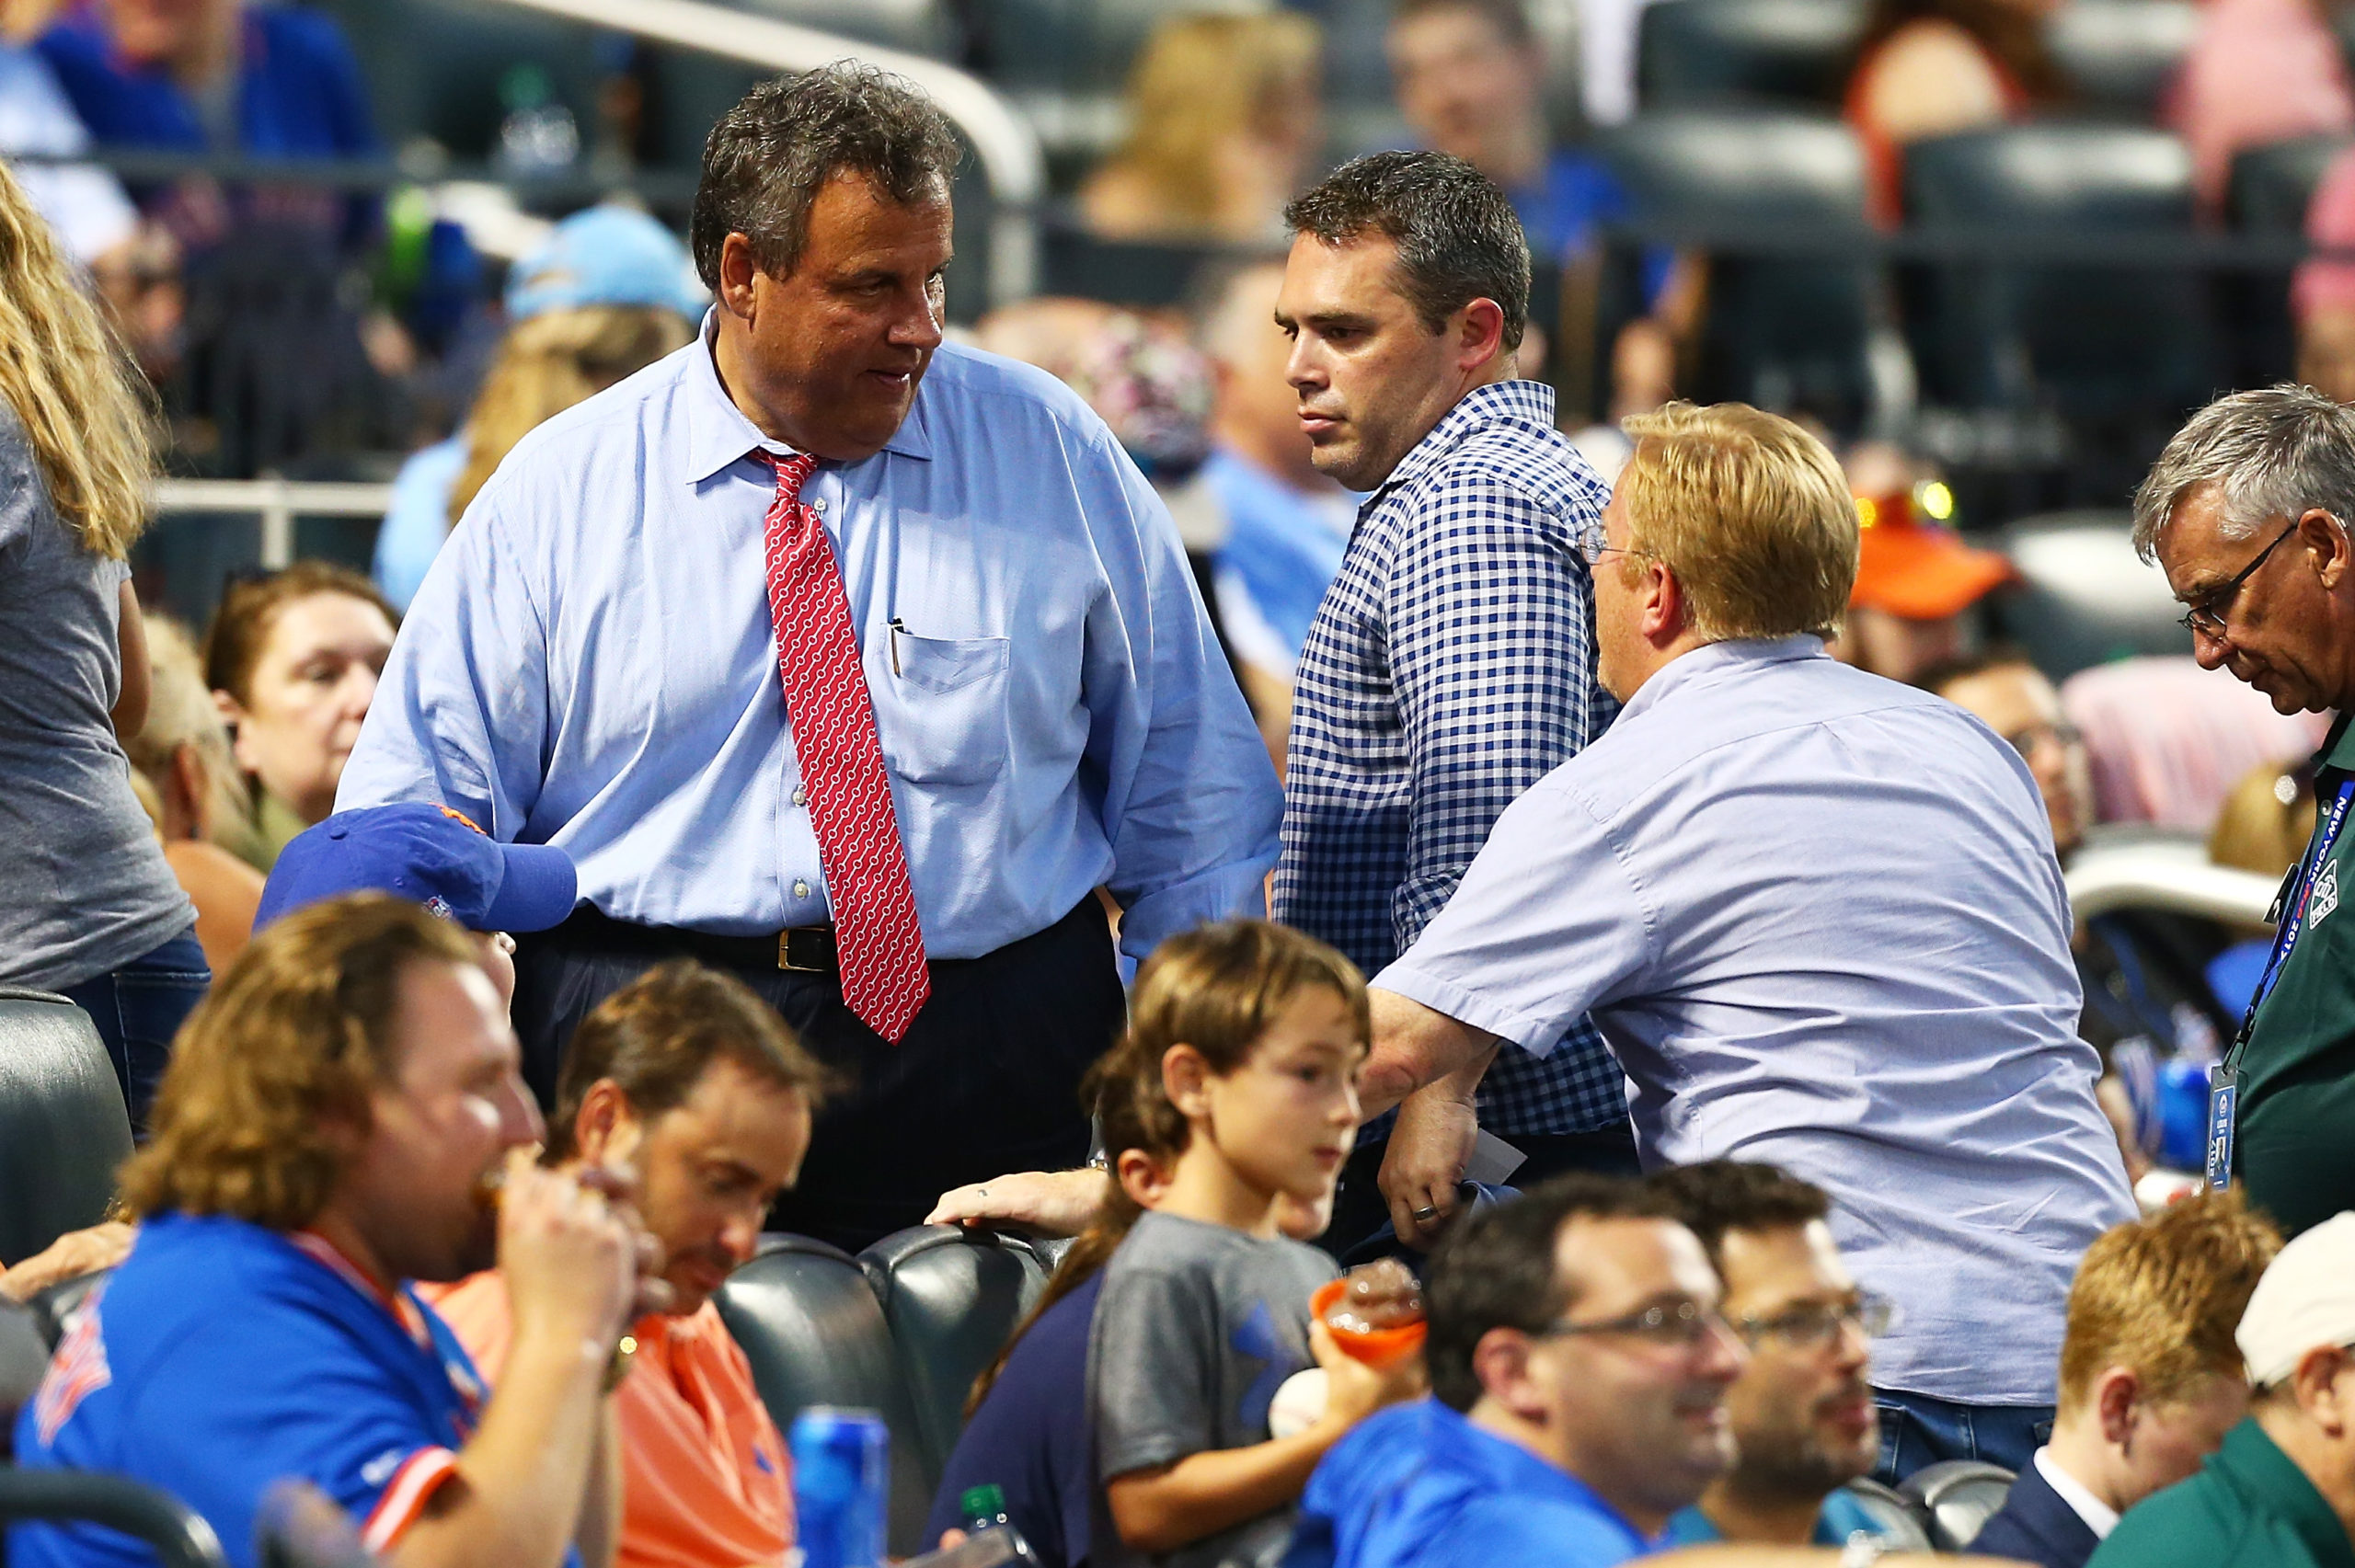 NEW YORK, NEW YORK - JULY 18: Governor of New Jersey Chris Christie attends the game between the New York Mets and the St. Louis Cardinals at Citi Field on July 18, 2017 in the Flushing neighborhood of the Queens borough of New York City. (Photo by Mike Stobe/Getty Images)